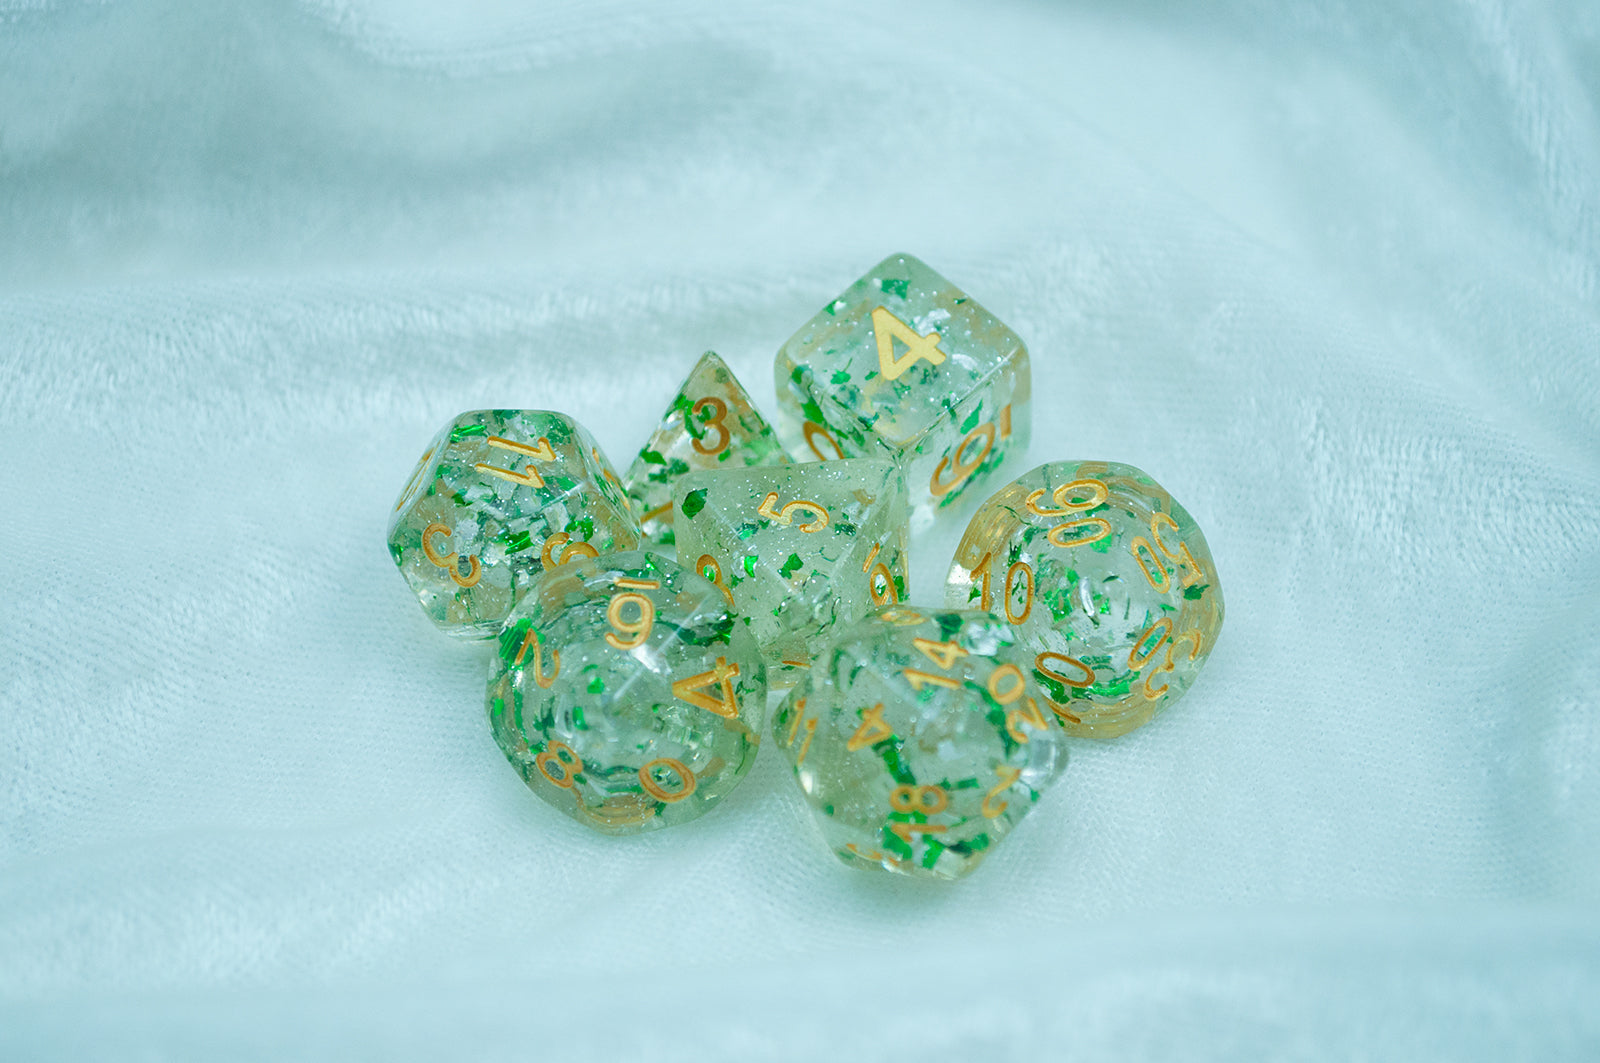 The Metallic Emerald 7 piece dice set from Tabletop Loot with green metallic flakes suspended in clear resin with glitter and gold numbering.